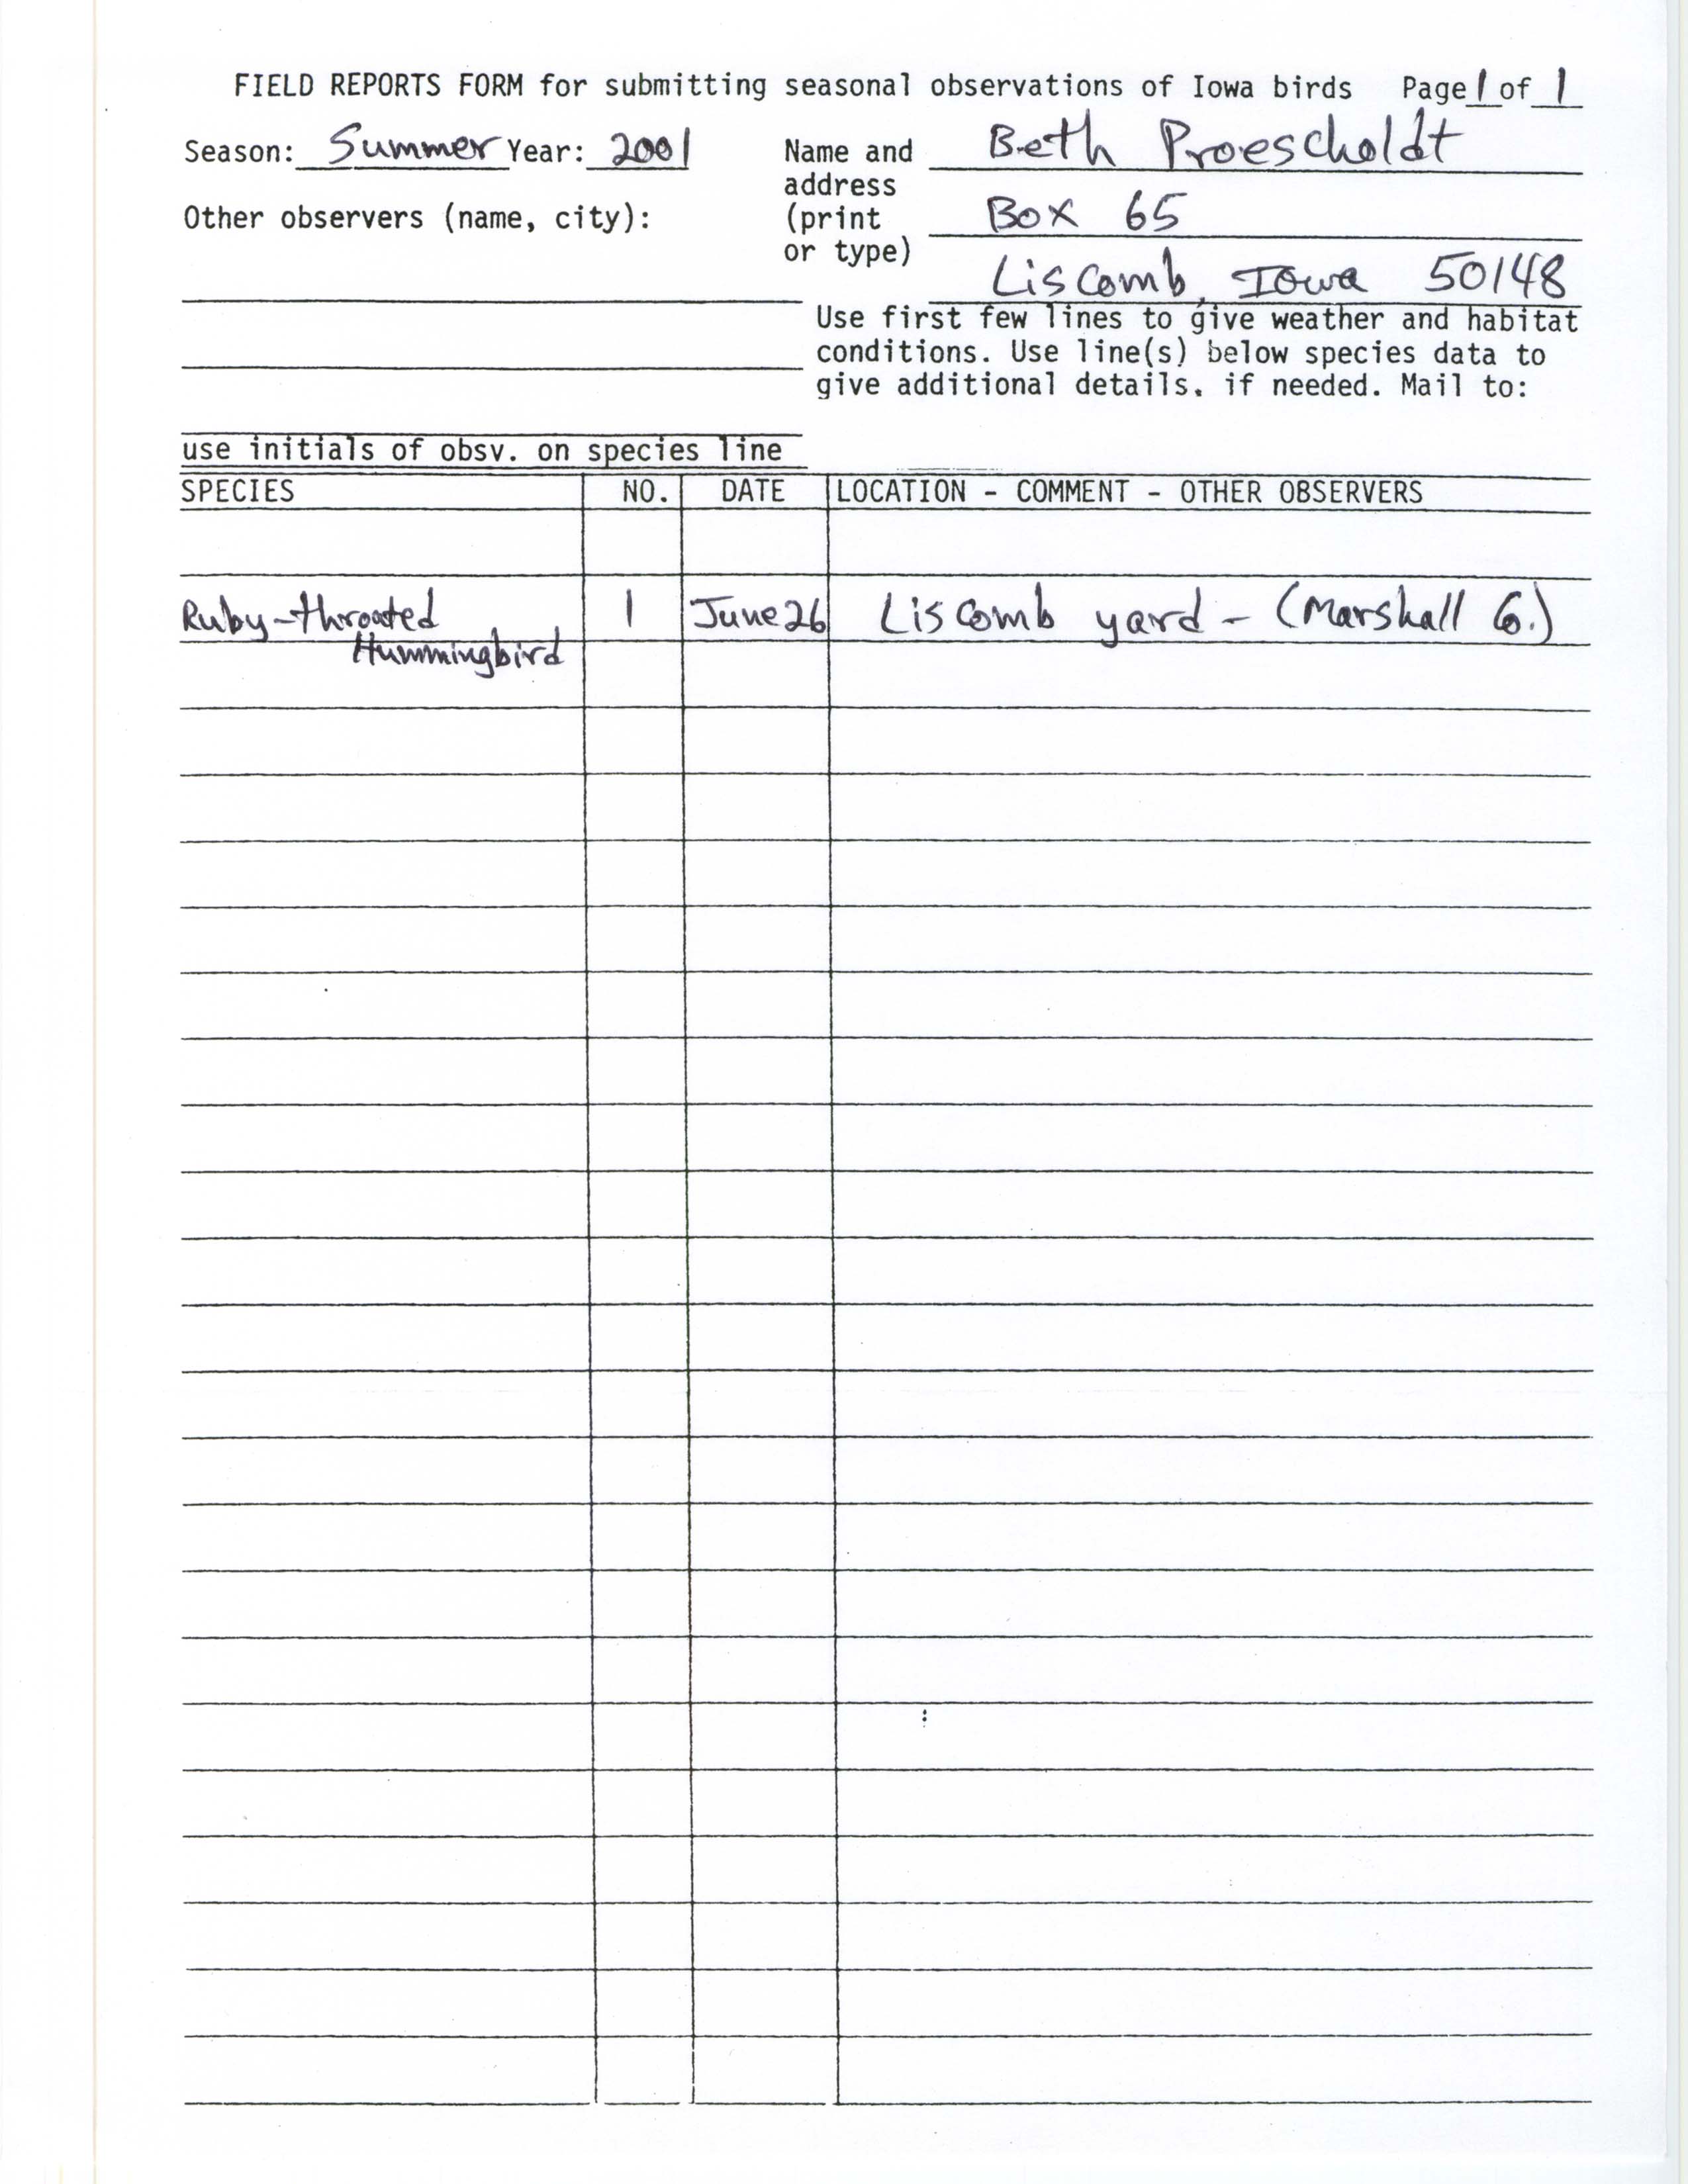 Field reports form for submitting seasonal observations of Iowa birds, Beth Proescholdt, summer 2001